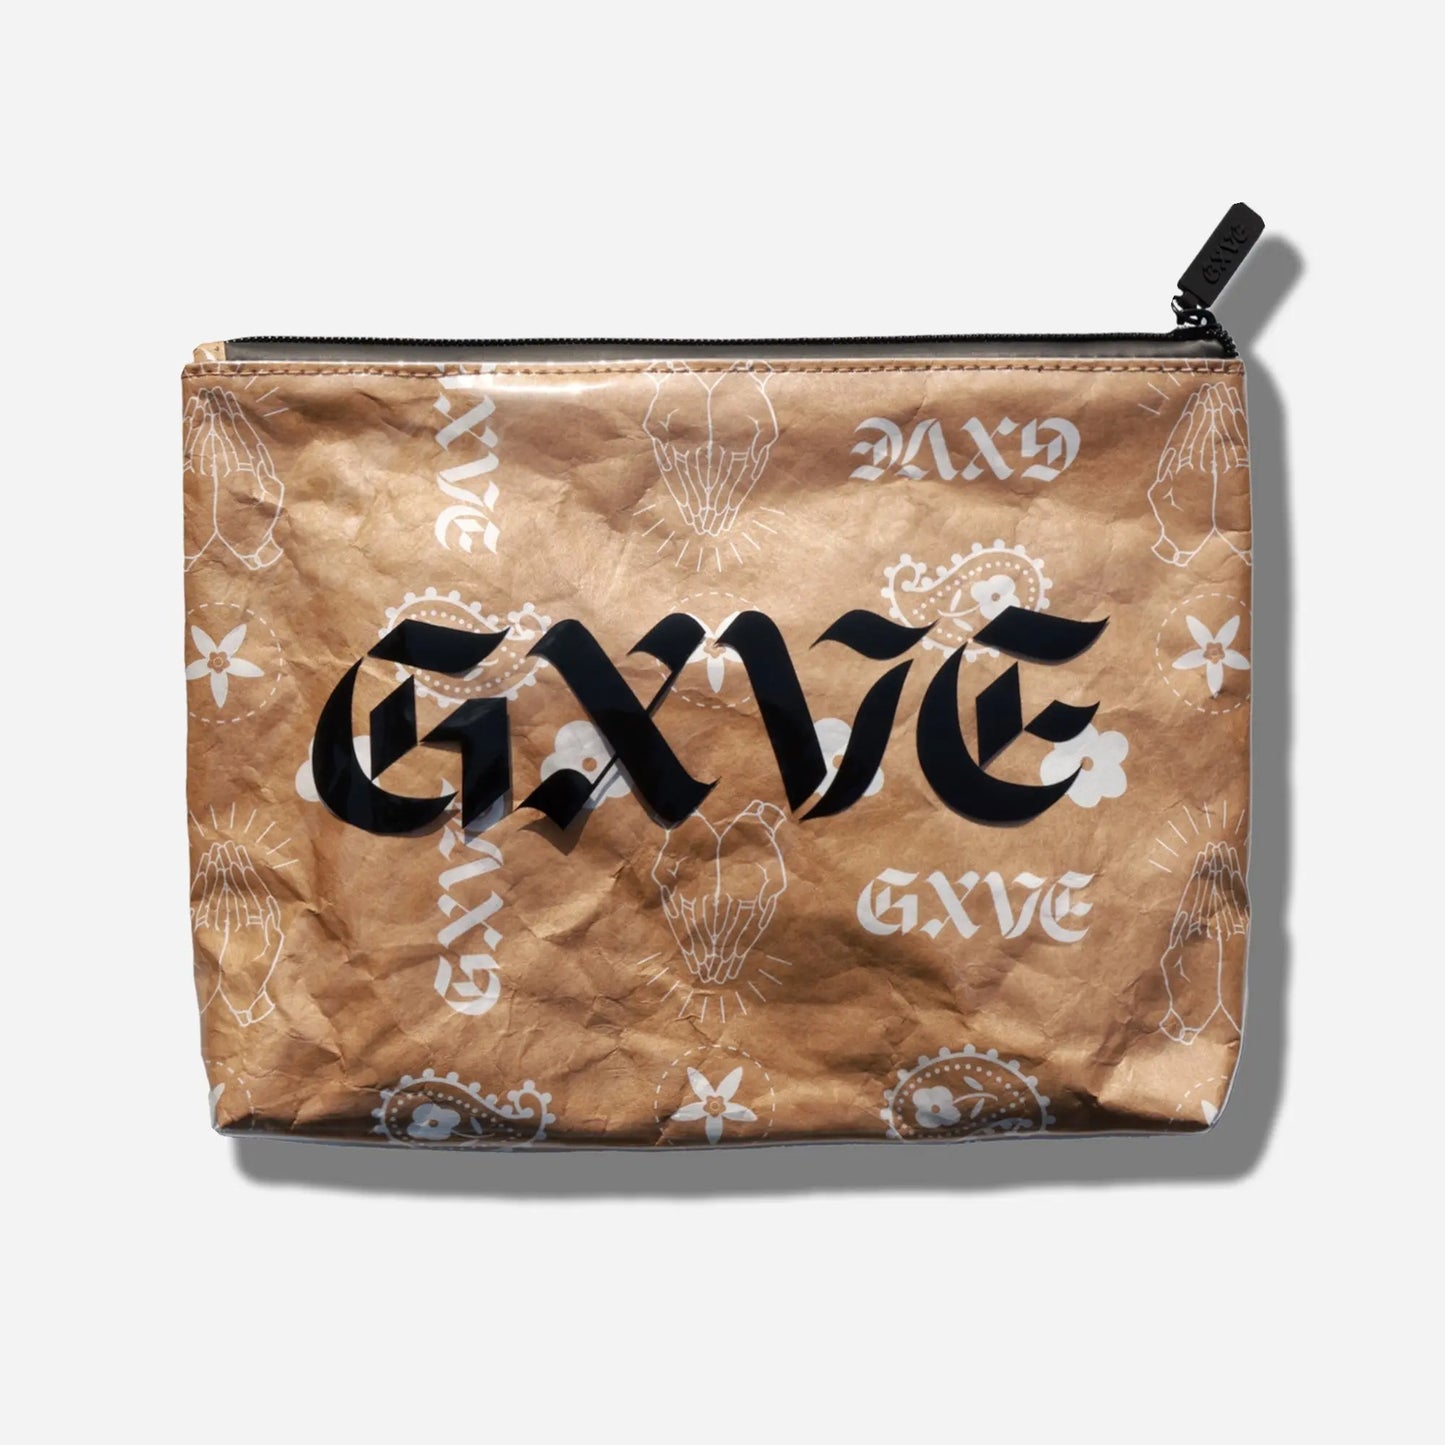 GXVE Kraft - The perfect makeup bag for all your GXVE essentials 